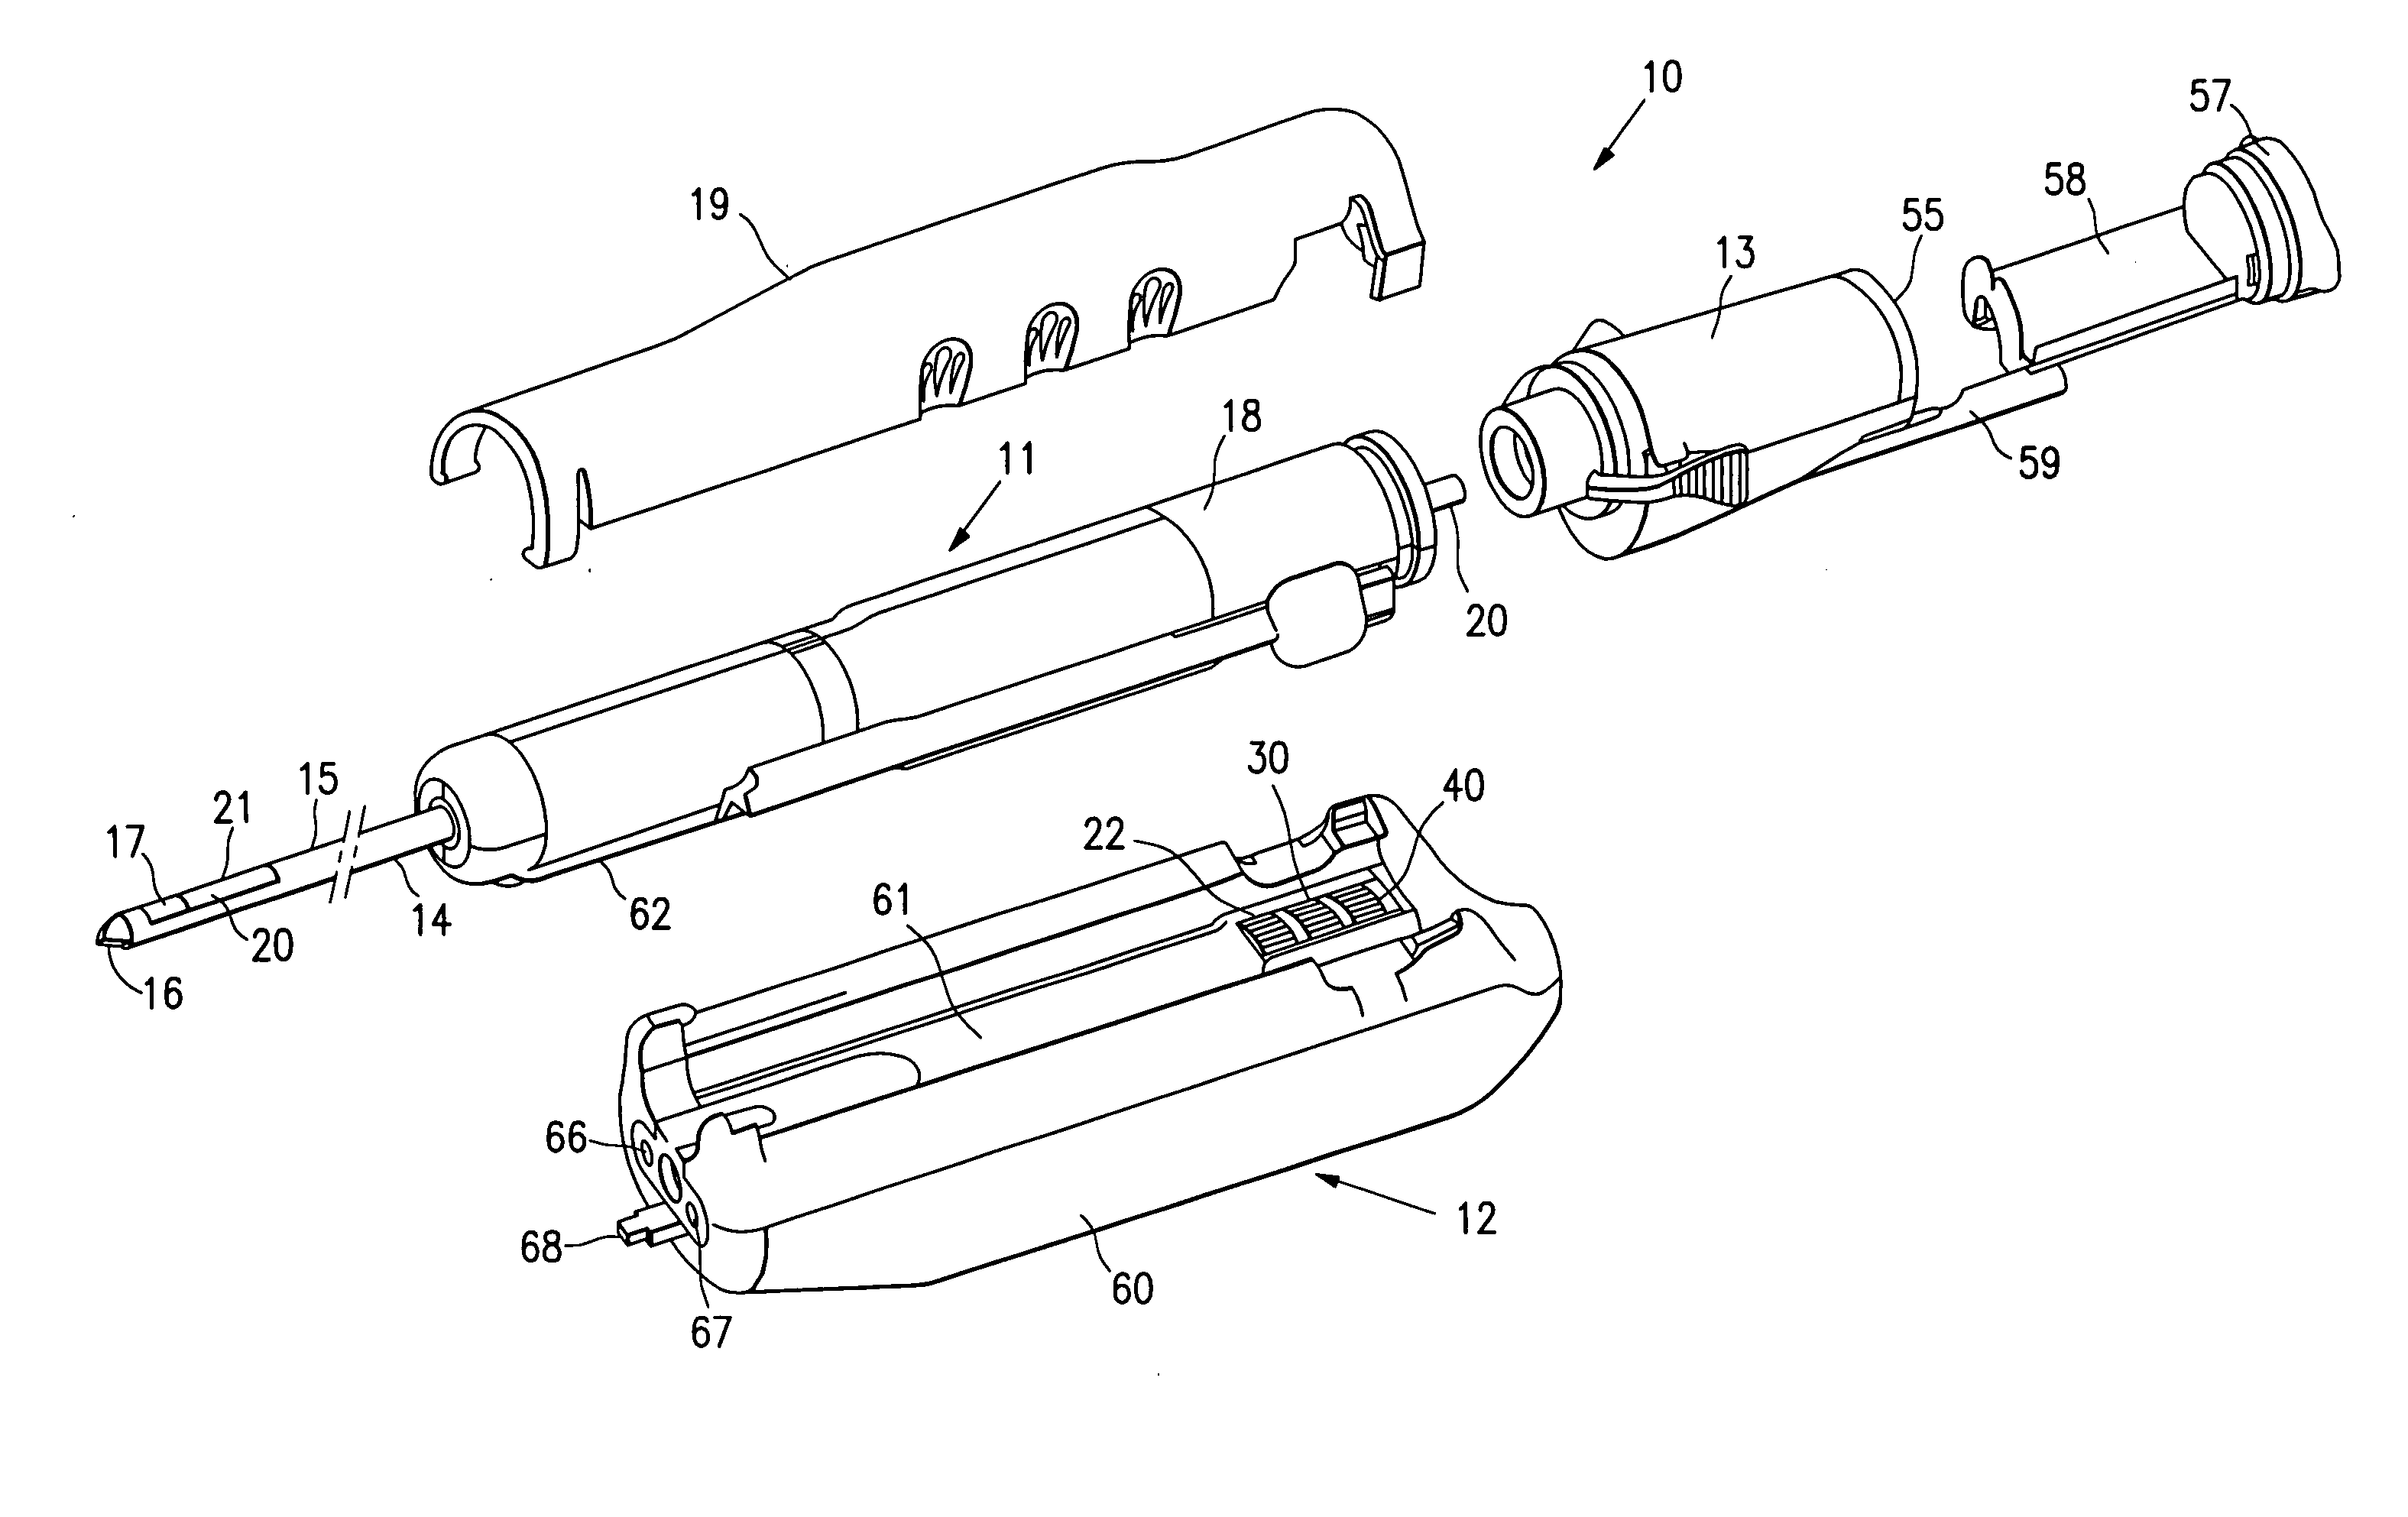 Biopsy device with aperture orientation and improved tip